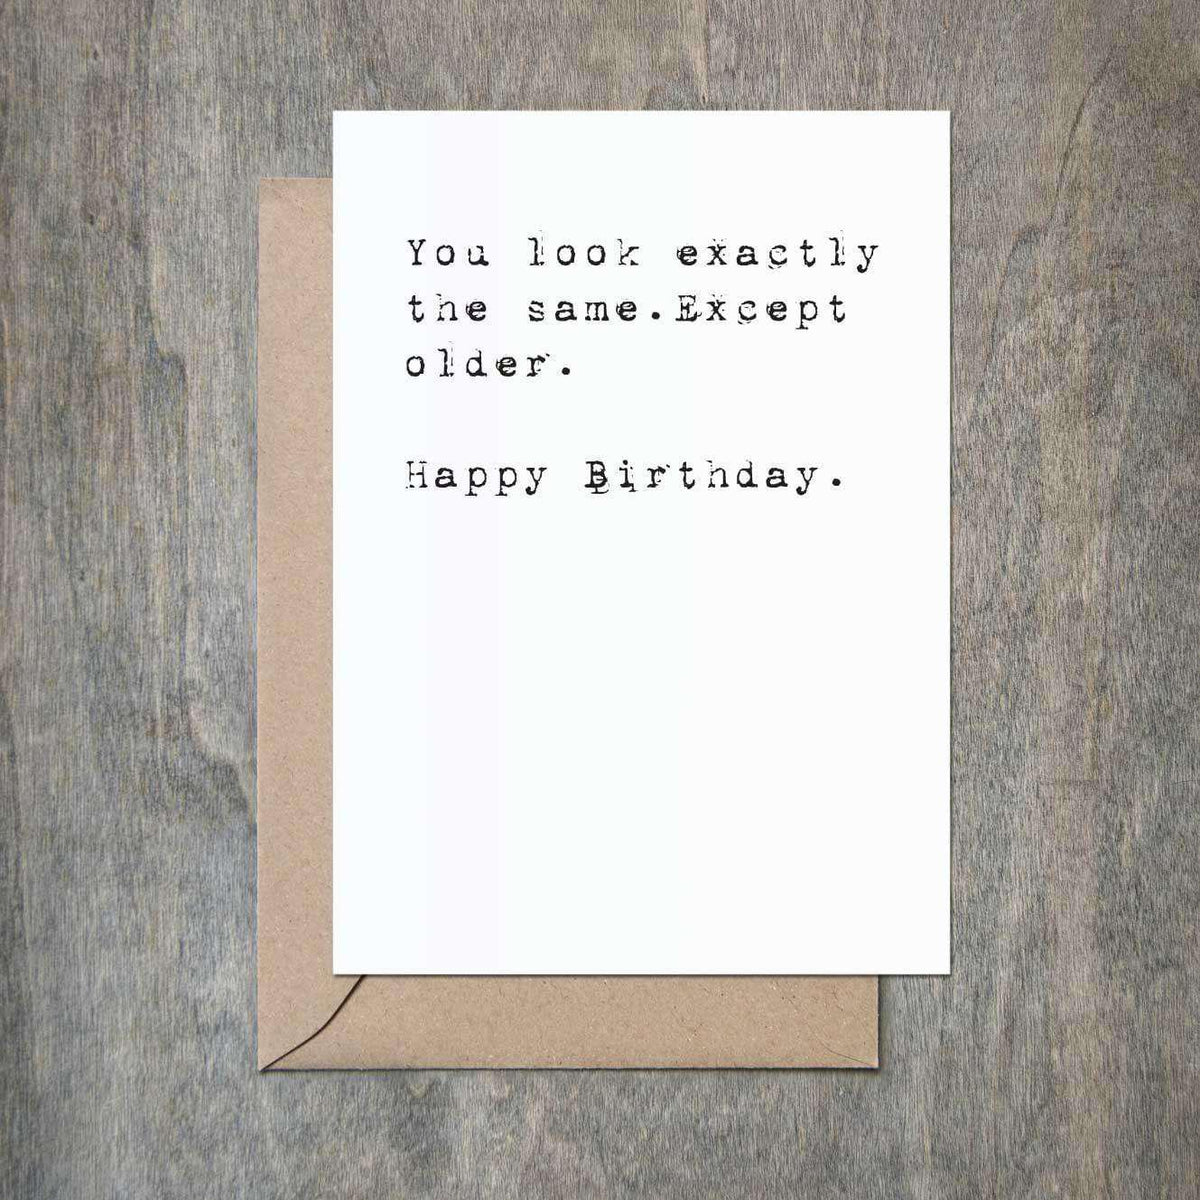 Funny Happy Birthday Cards - Sent To You Or Them